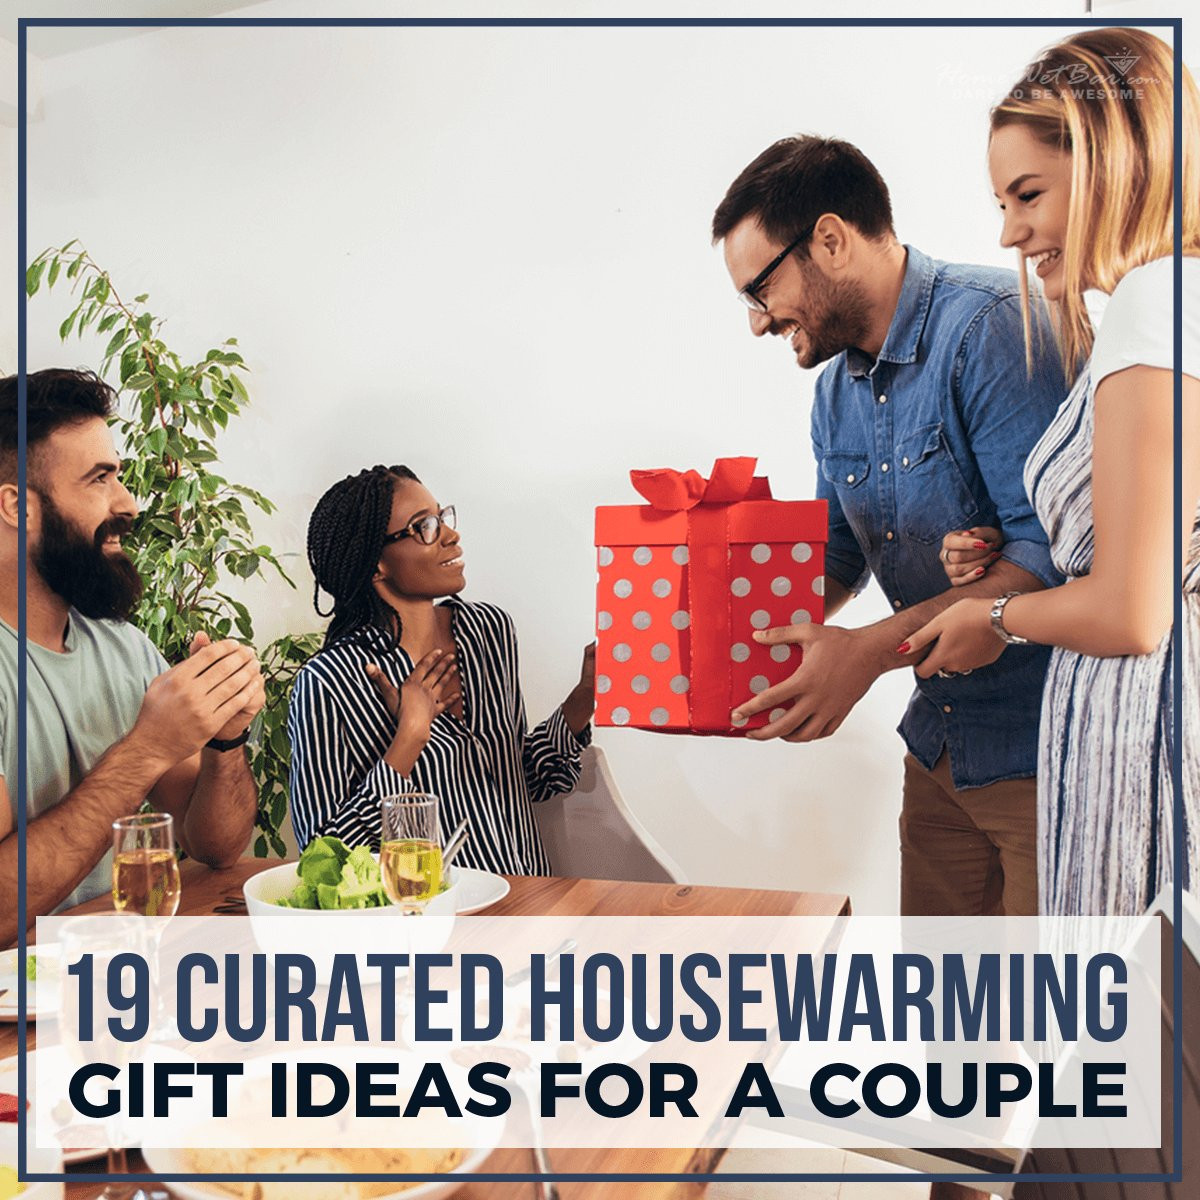 Housewarming Gift Ideas For Couple
 19 Curated Housewarming Gift Ideas for A Couple